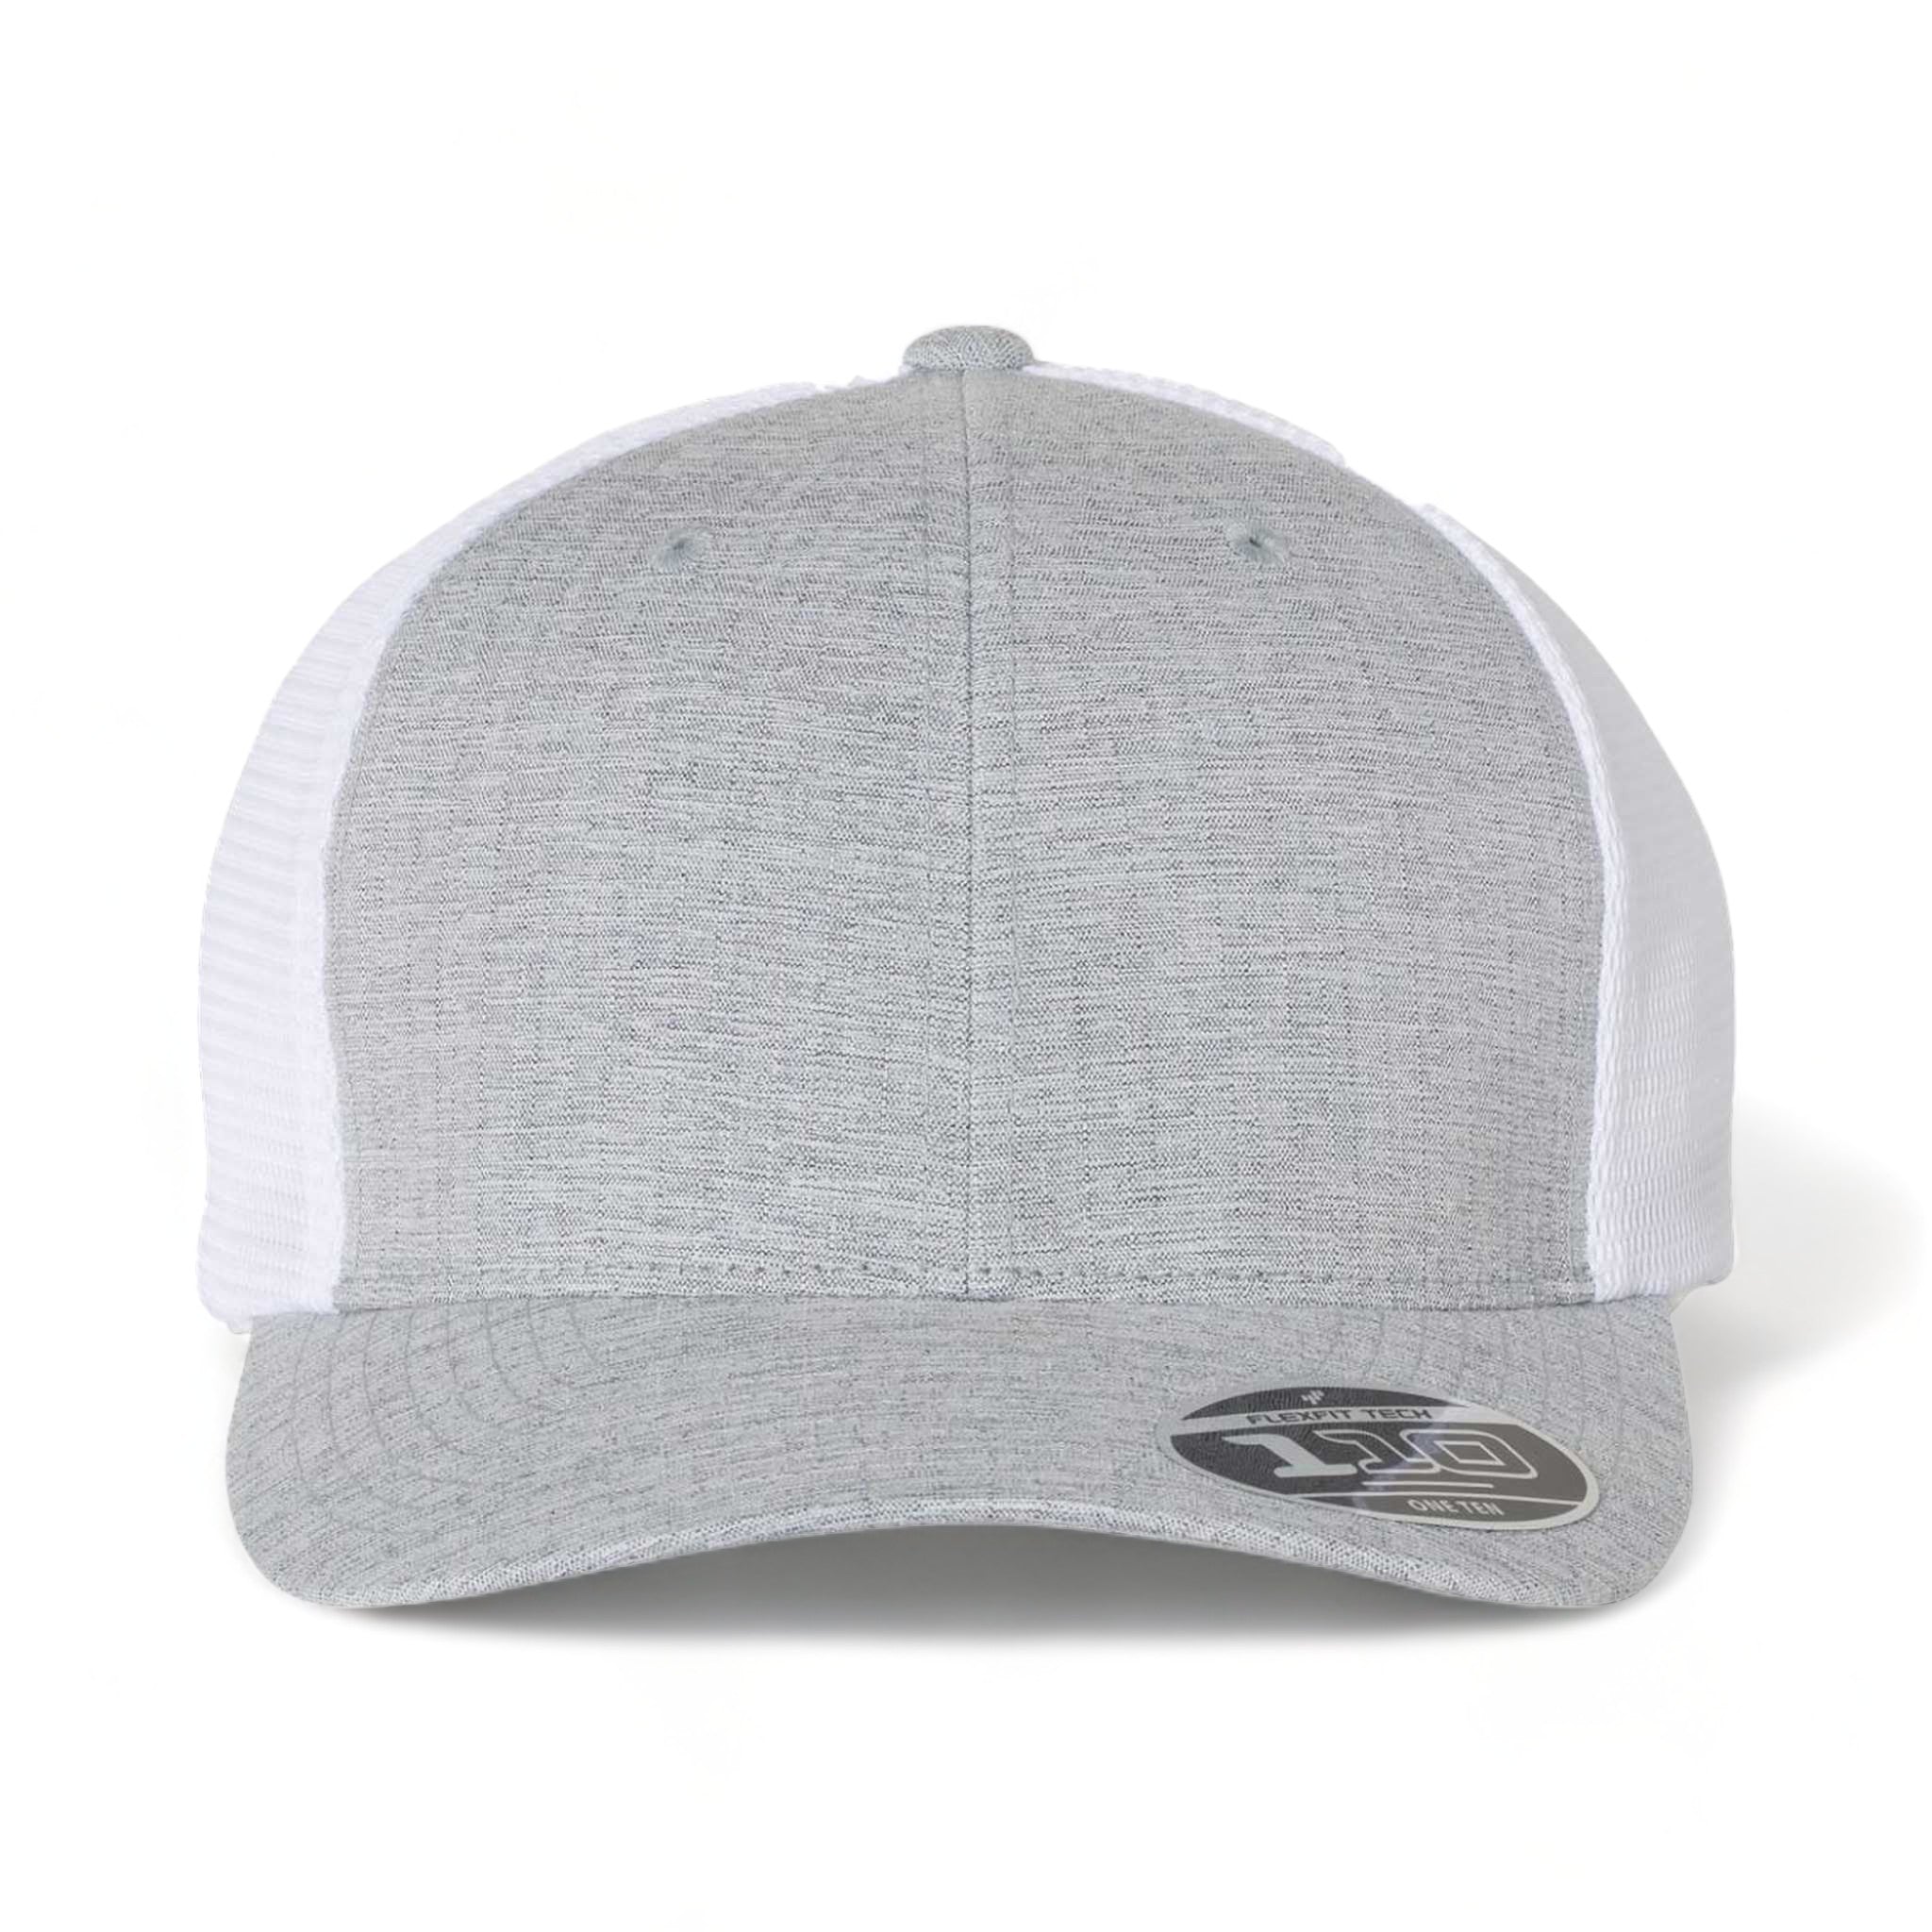 Front view of Flexfit 110M custom hat in melange silver and white